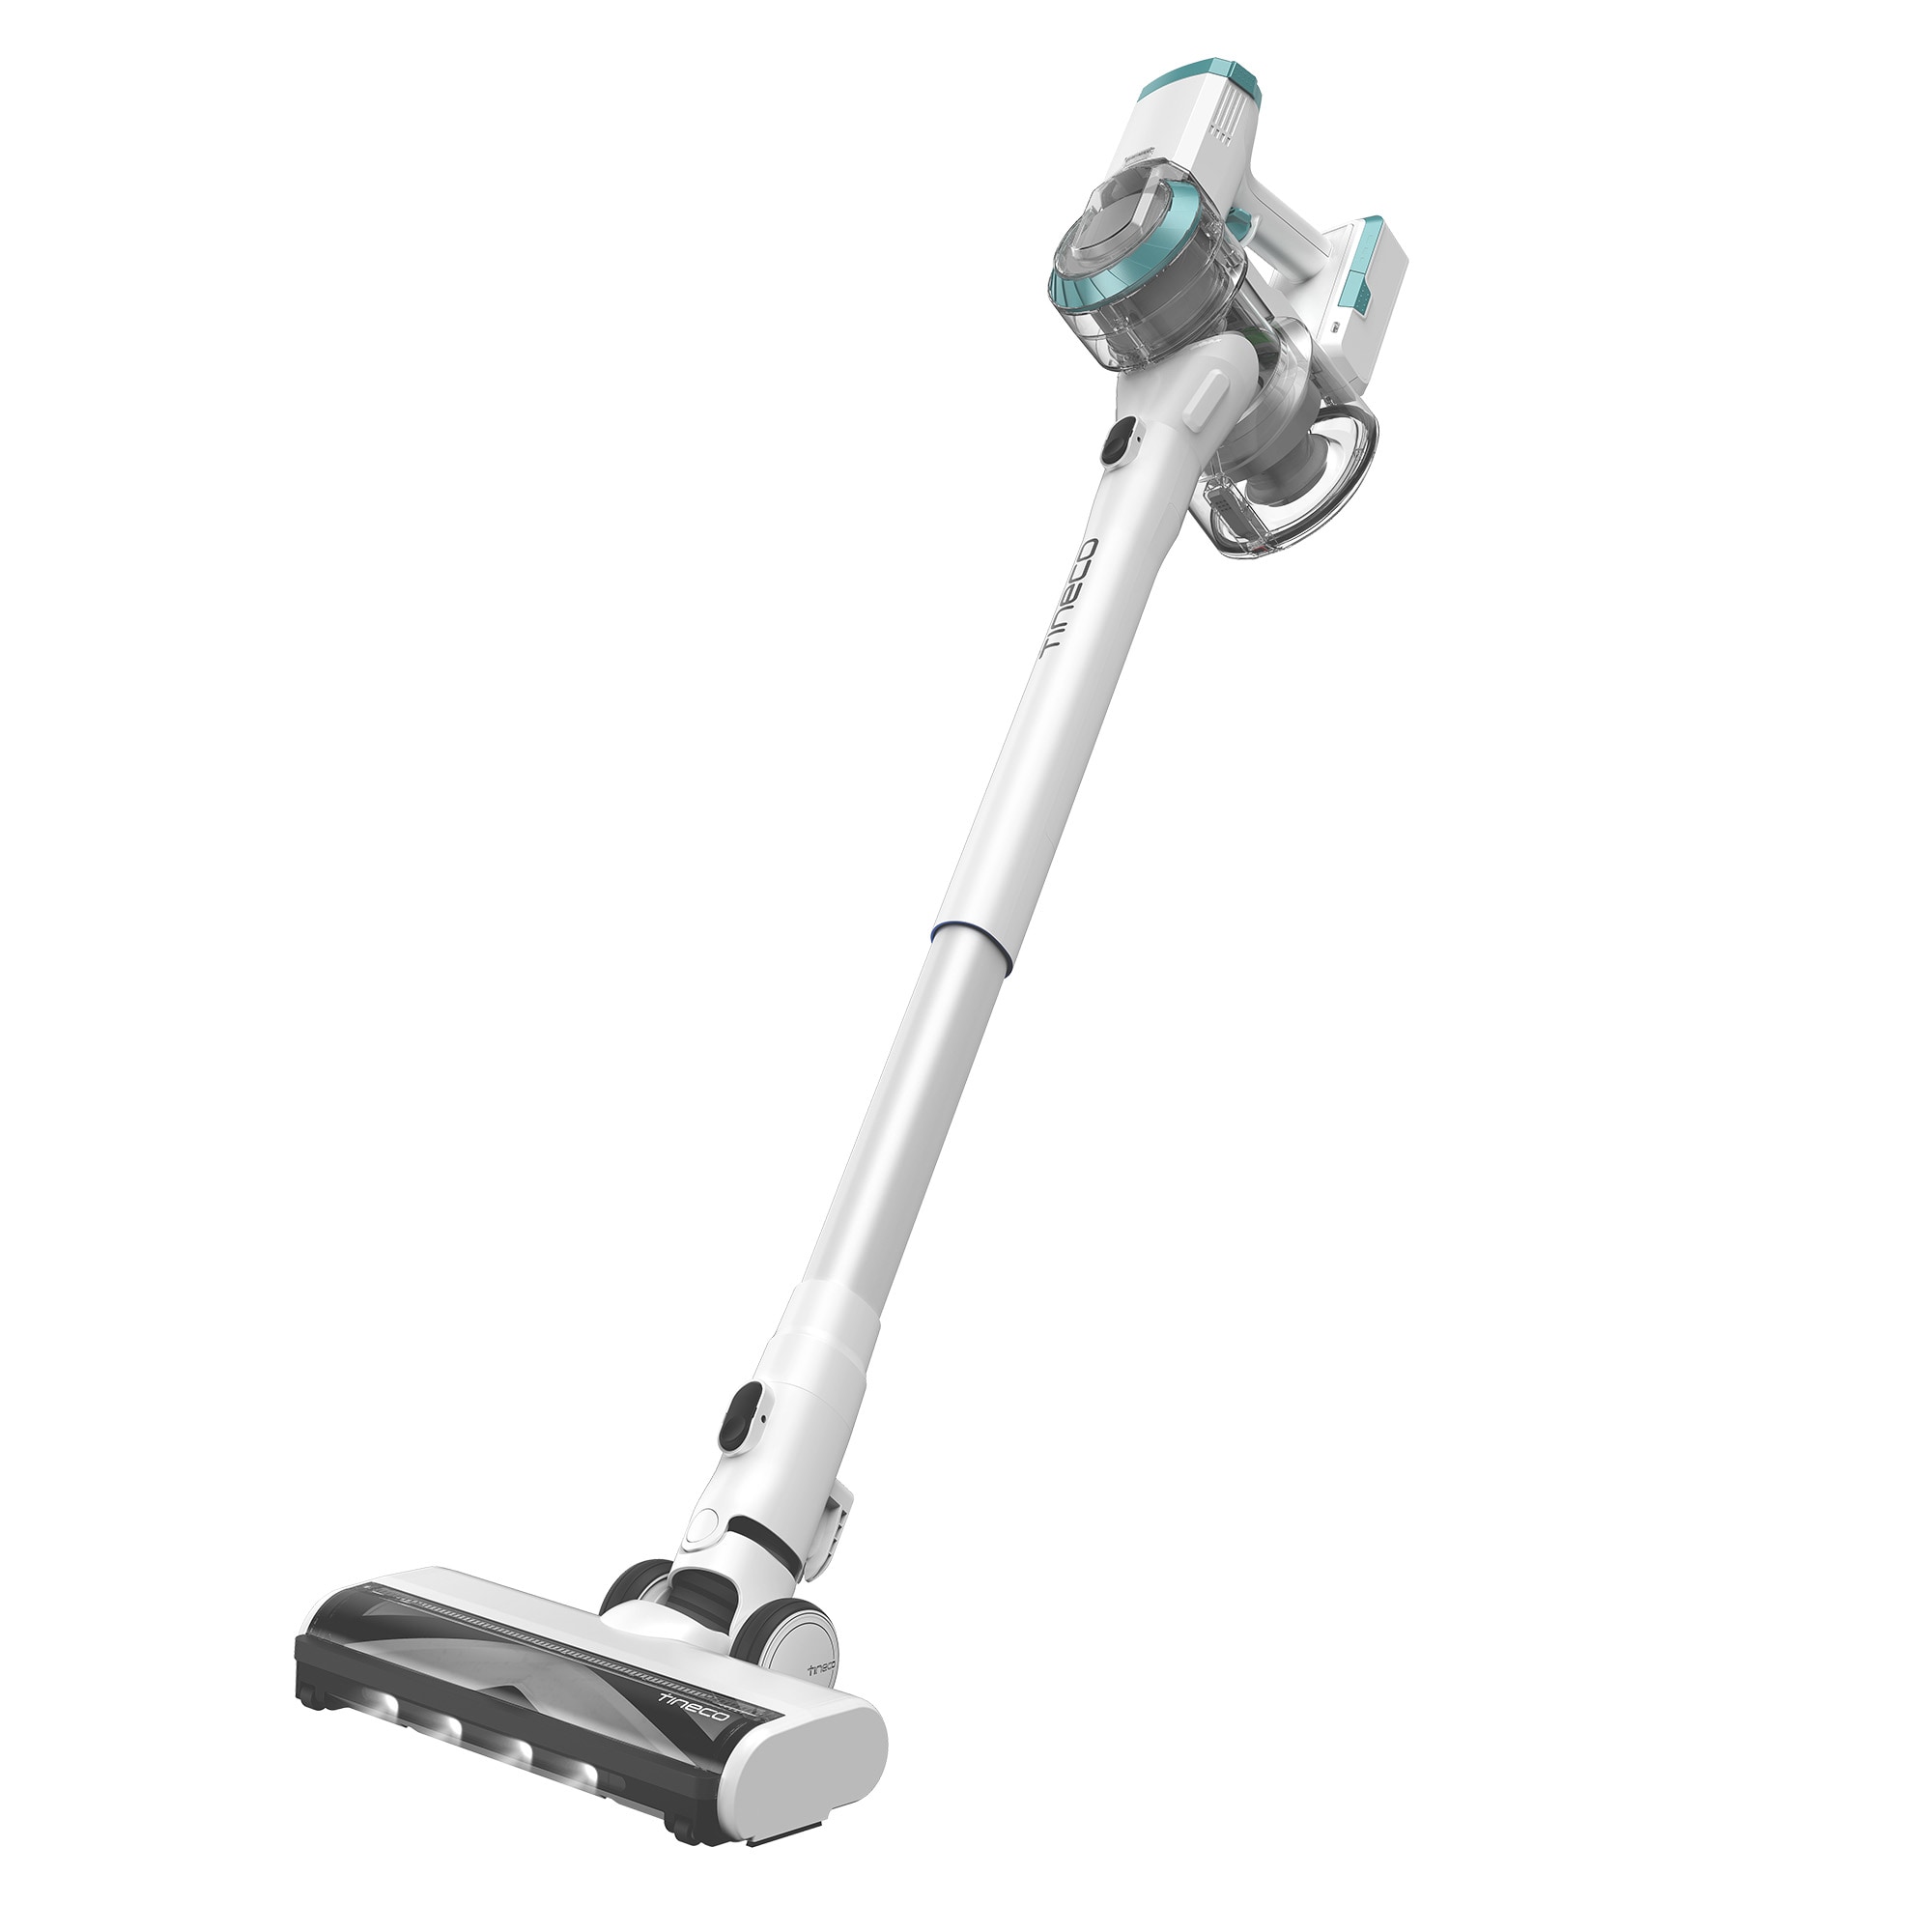 Tineco PWRHERO 11 Pet 21.6 Volt Cordless Pet Stick Vacuum (Convertible To  Handheld) in the Stick Vacuums department at